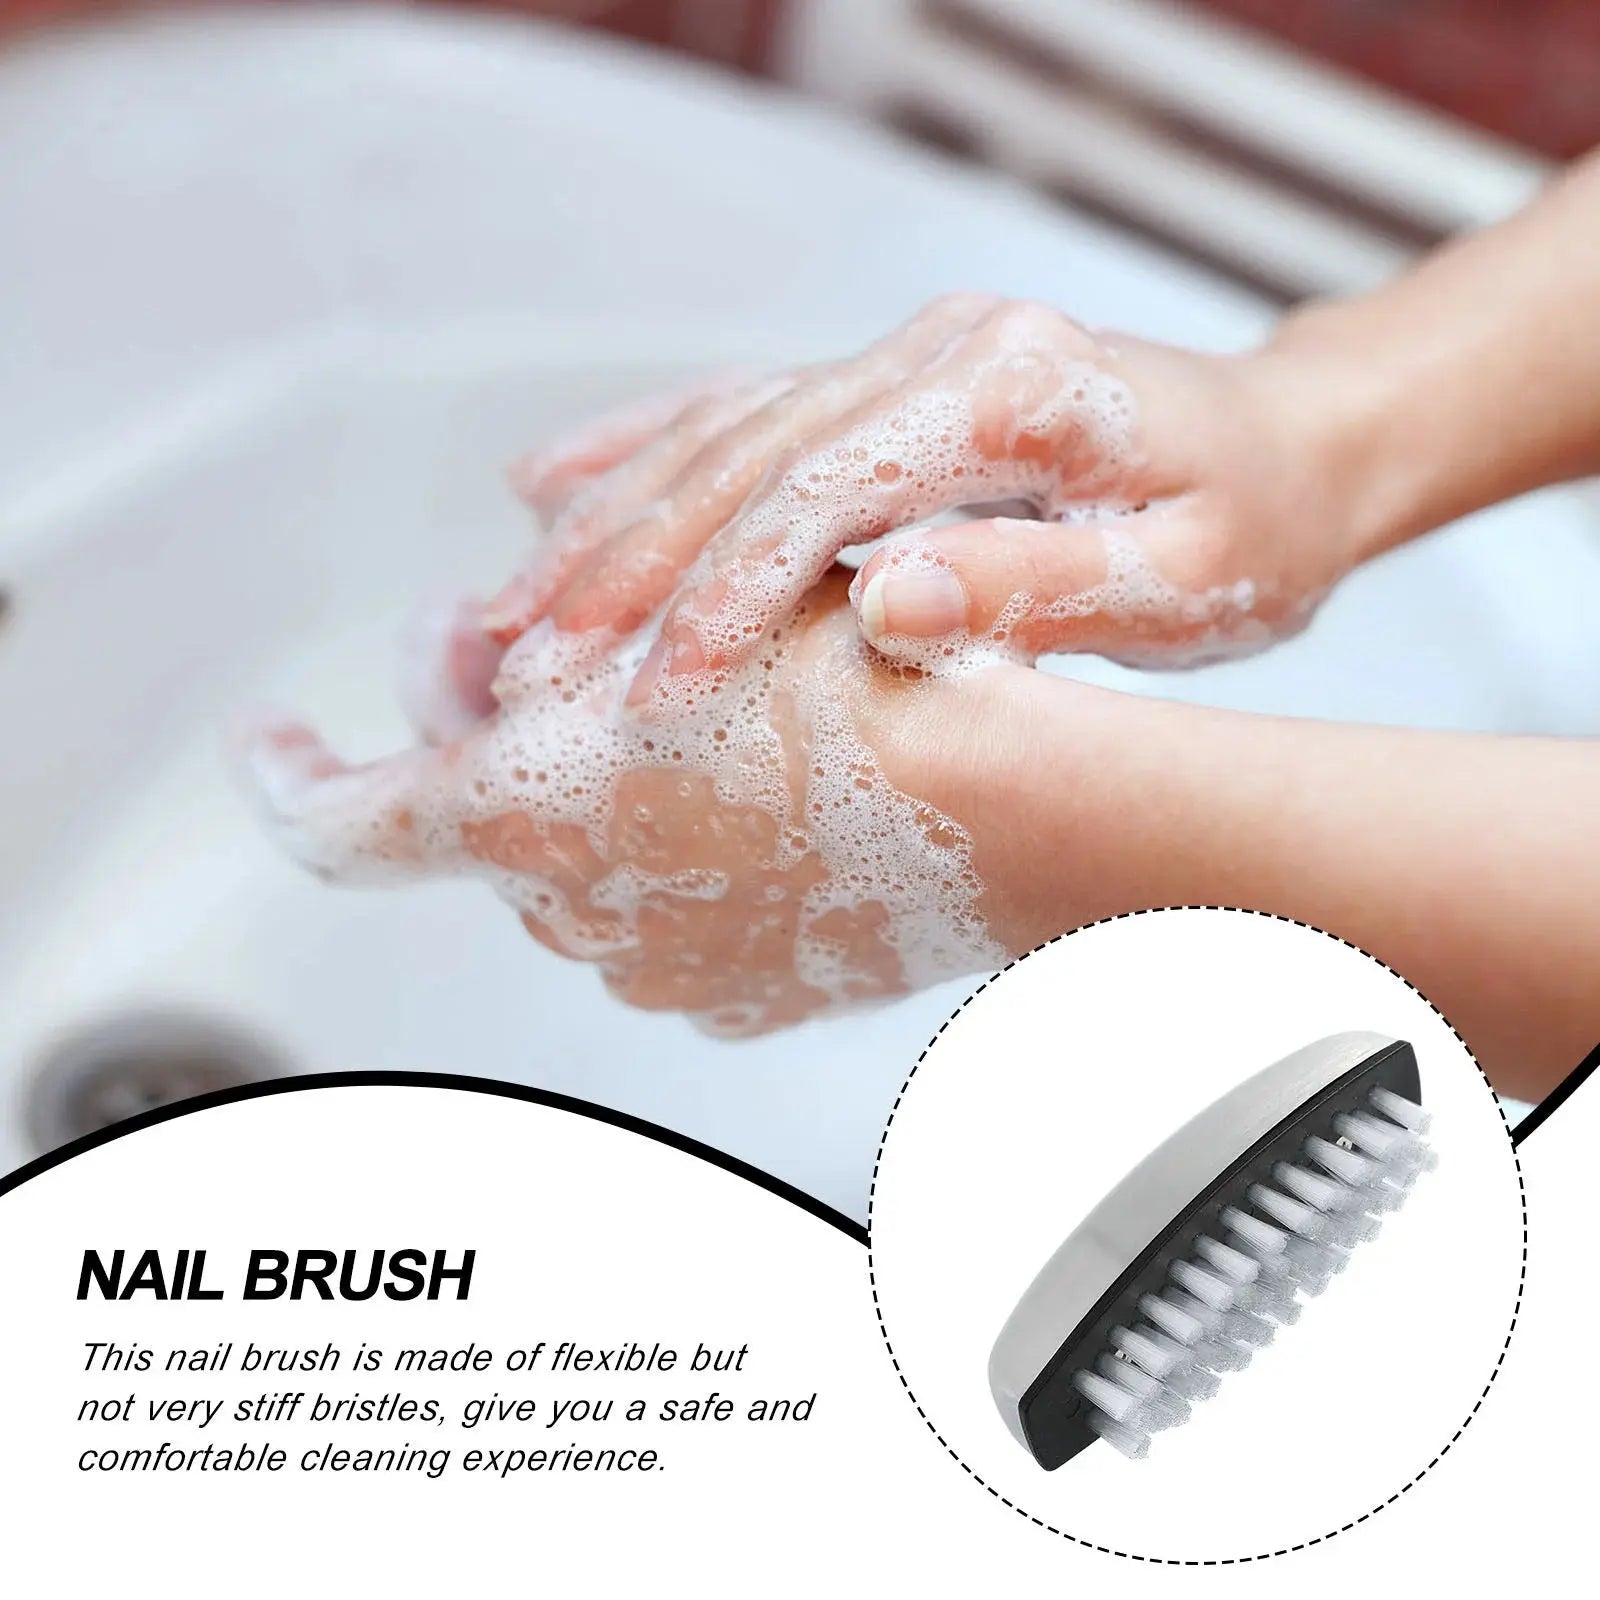 Brush Nail Cleaning Hand Cleaner Scrubber Manicure Scrub Scrubbing Fingernail Toes Finger Metal Washing Nails BrothersCarCare